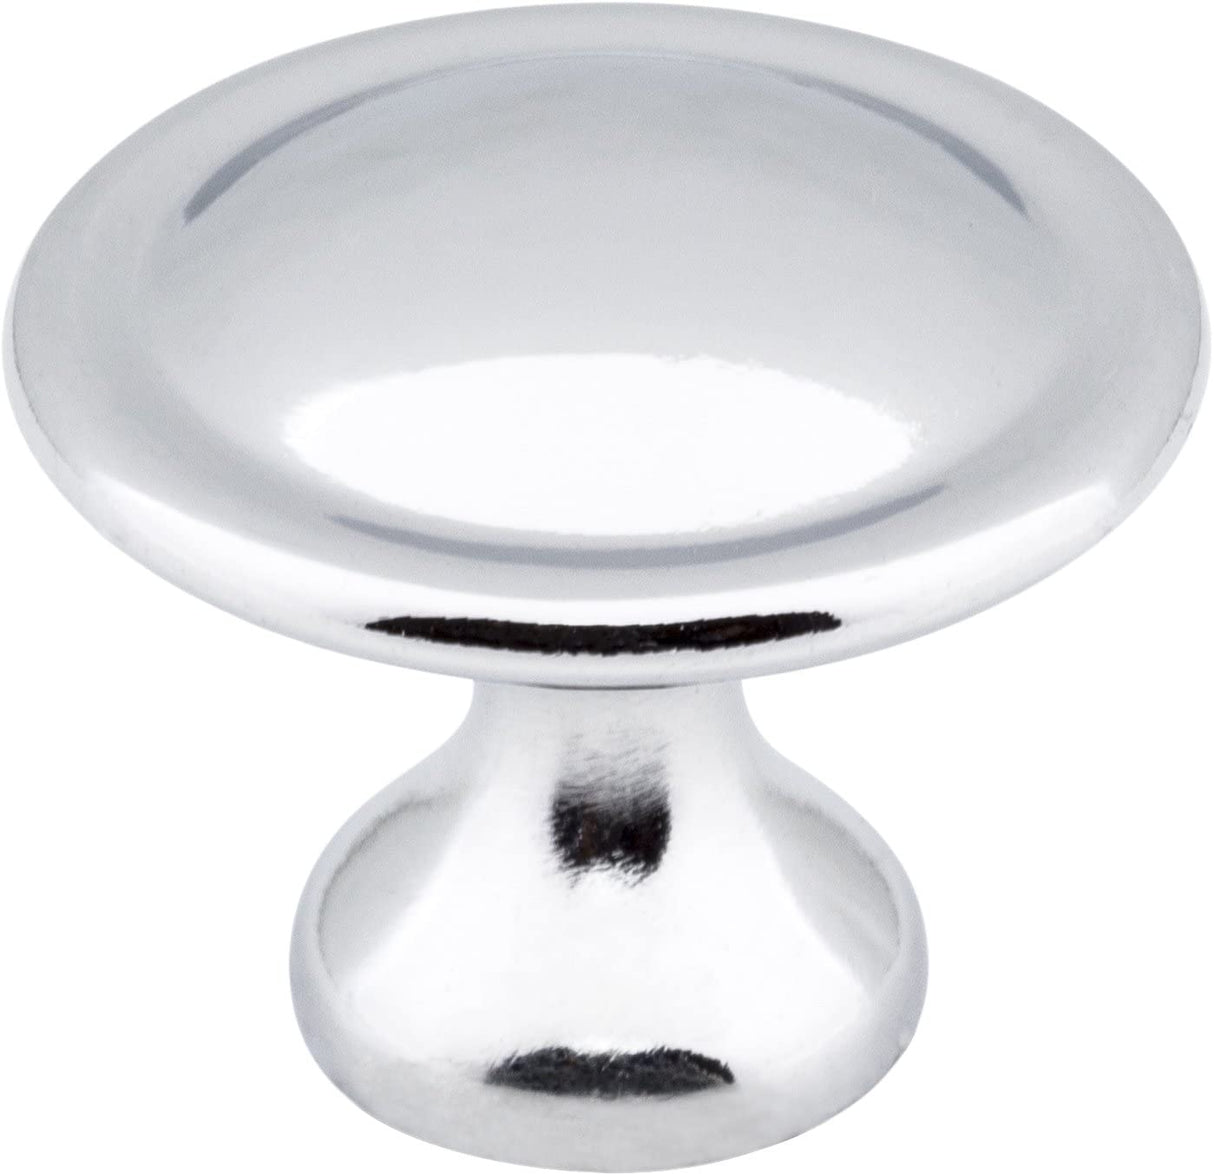 Elements 647DBAC 1-1/8" Diameter Brushed Oil Rubbed Bronze Button Watervale Cabinet Mushroom Knob